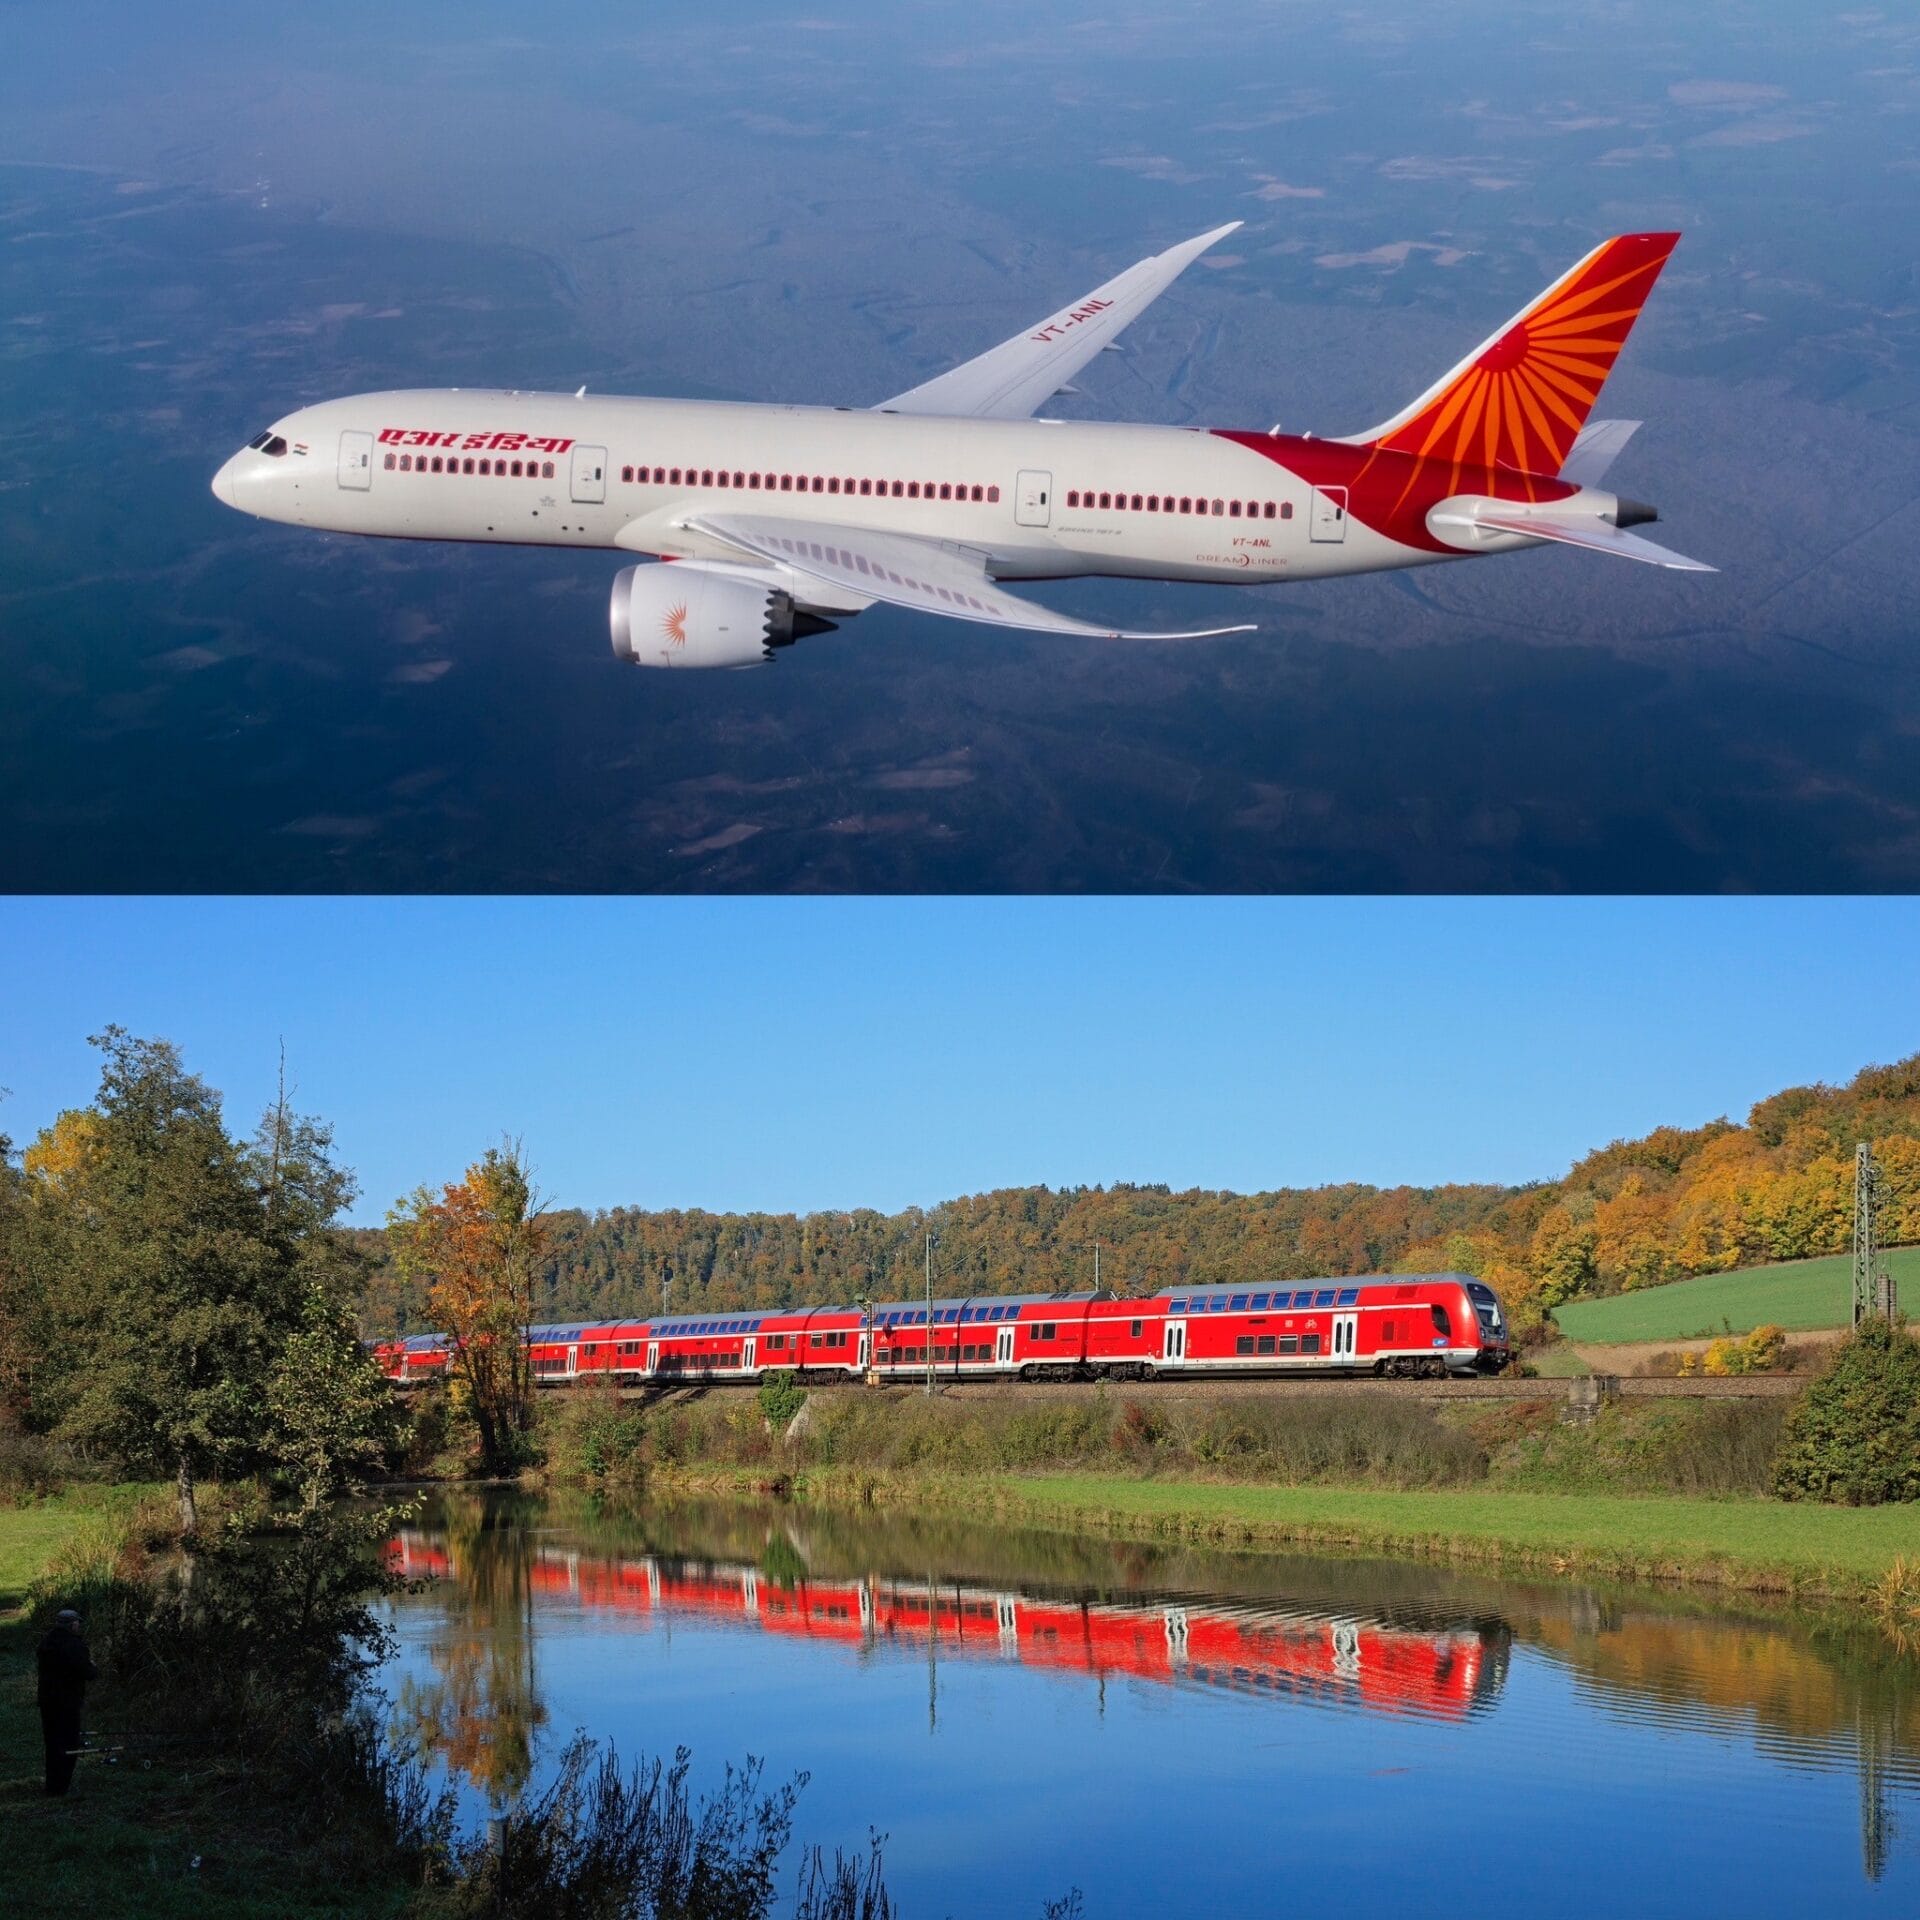 Air India partners with WorldTicket to offer Deutsche Bahn bookings across 5,600 stations